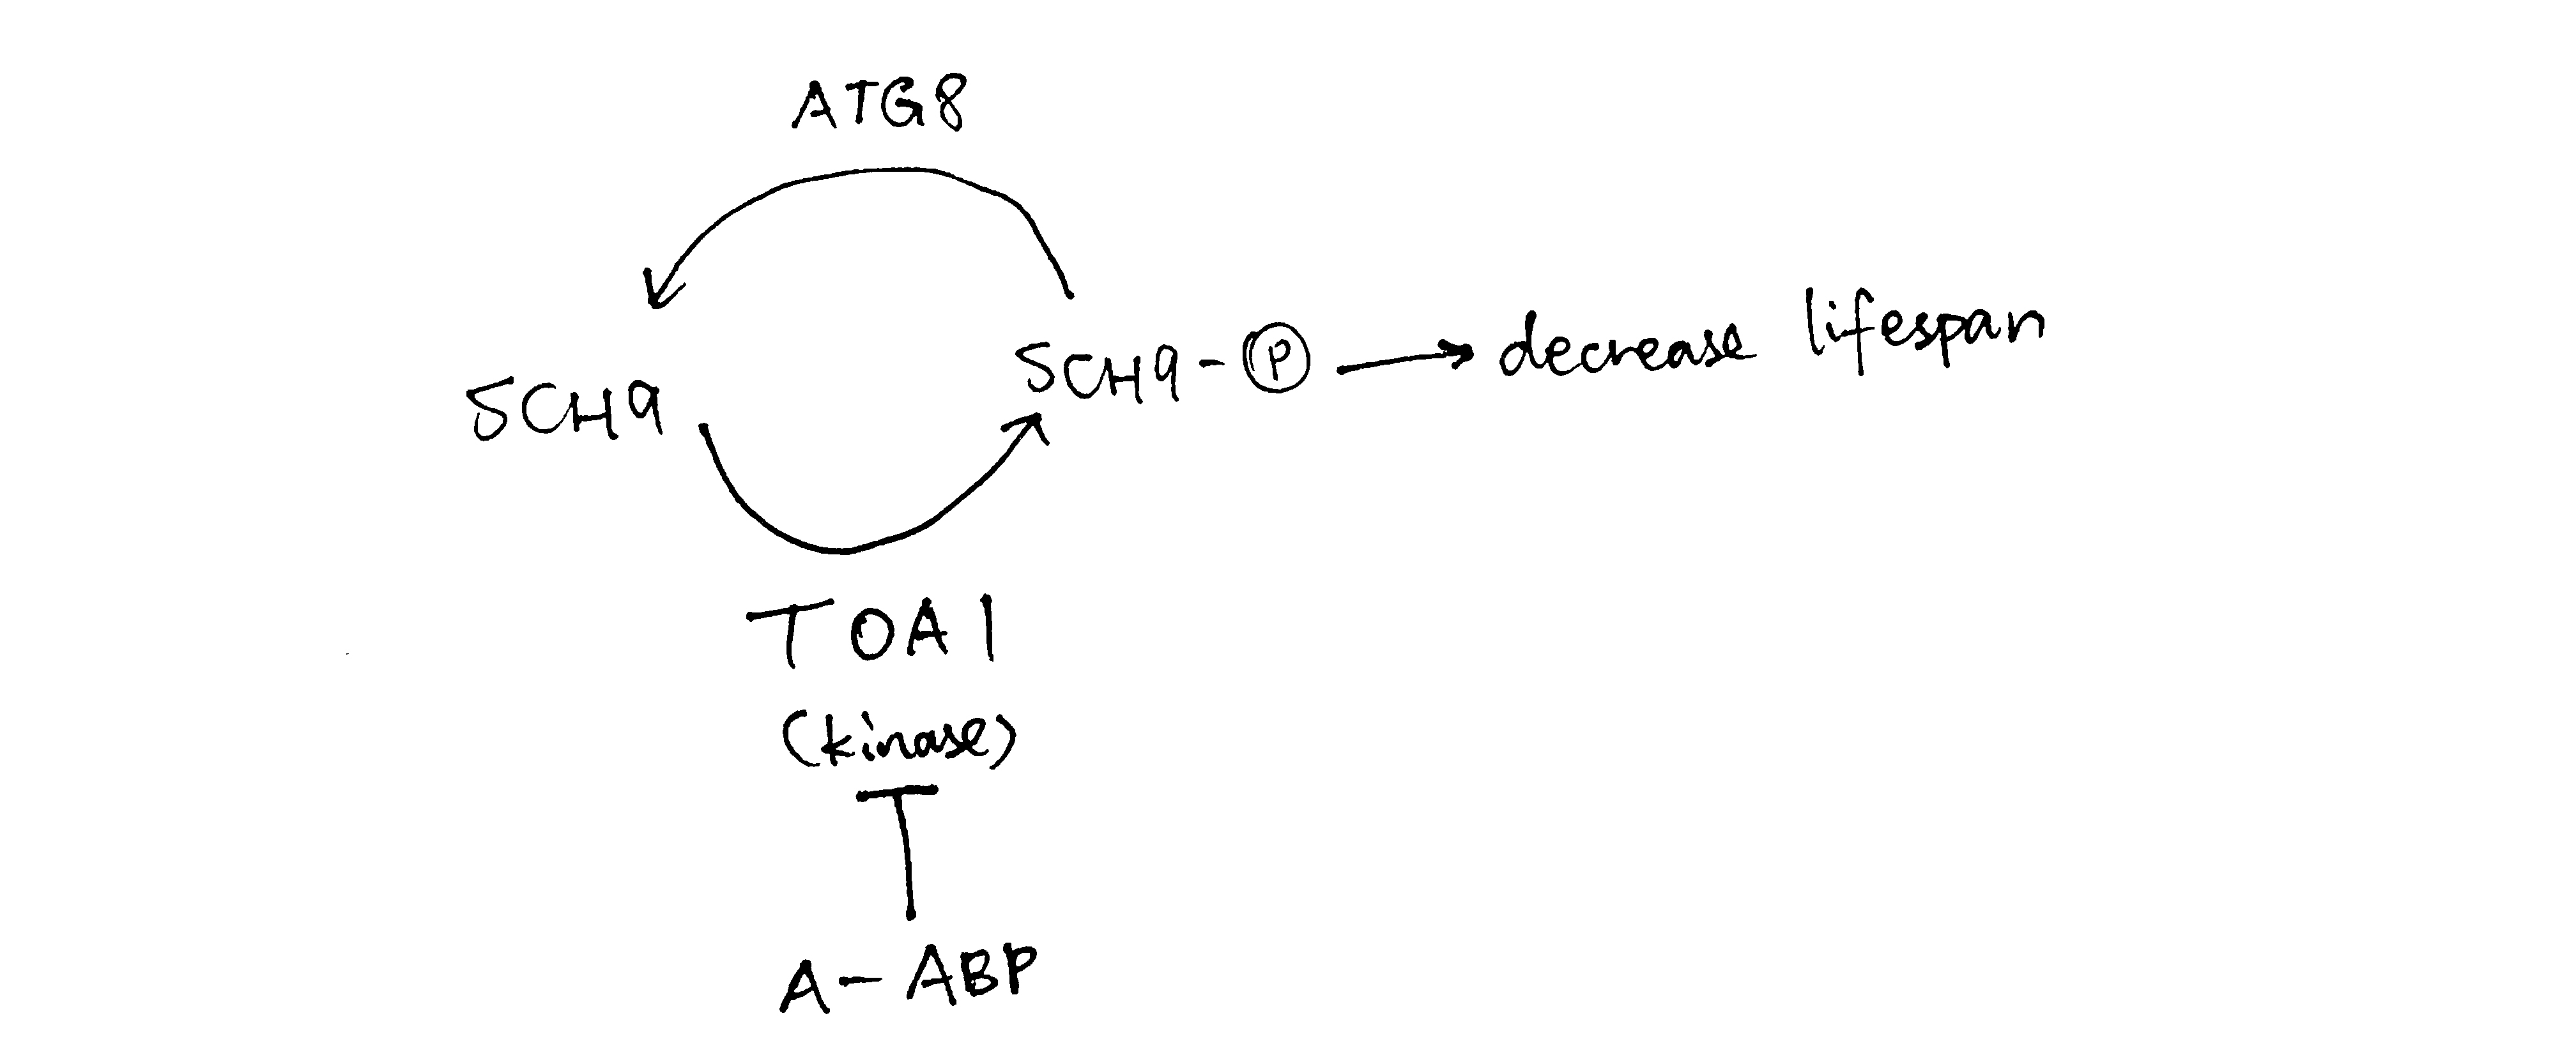 When compound A concentration increases, TOA is is inhibited and less Sch9 is phosphorylated, so there is less lifespan-reduction effect due to phosphorylated Sch9, and hence the lifespan increases. When the concentration of A gets too high, however, ATG8 phosphatase is expressed to dephosphorylate Sch9 and thus decrease lifespan.